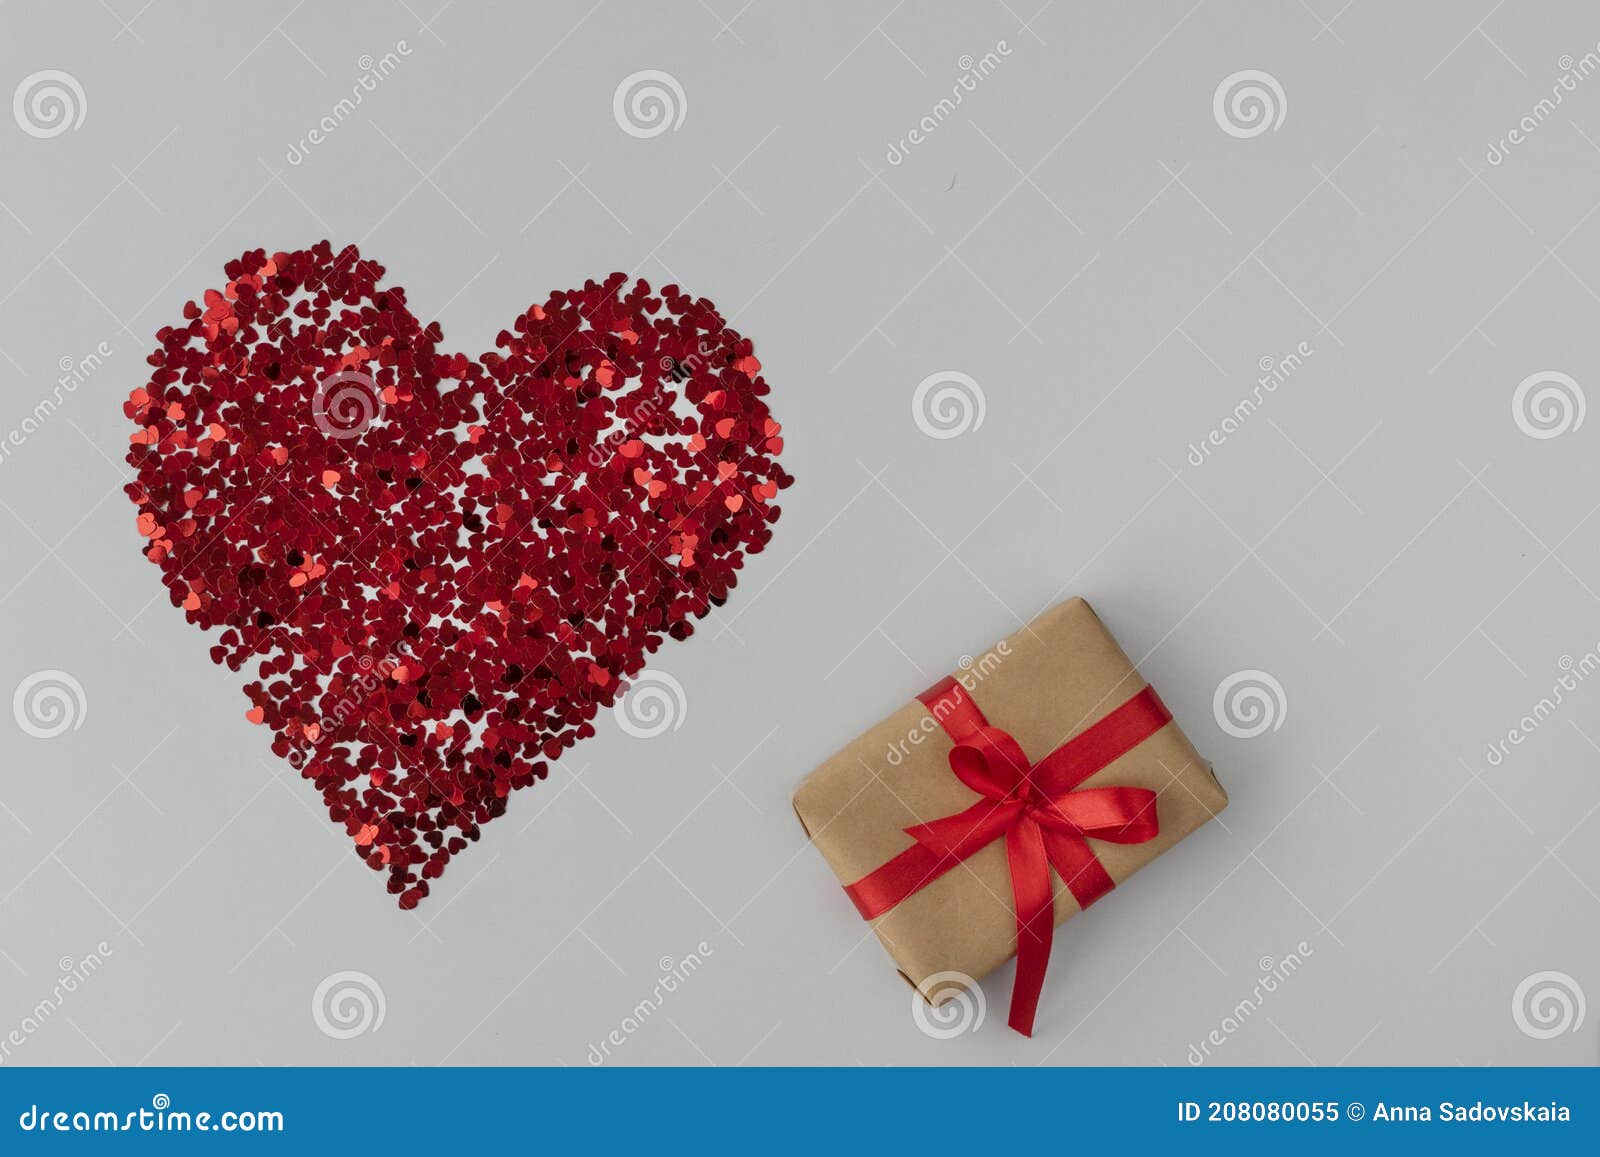 top view of big red heart made from little glittering confeti of heart s, gift box with red ribbon is near,